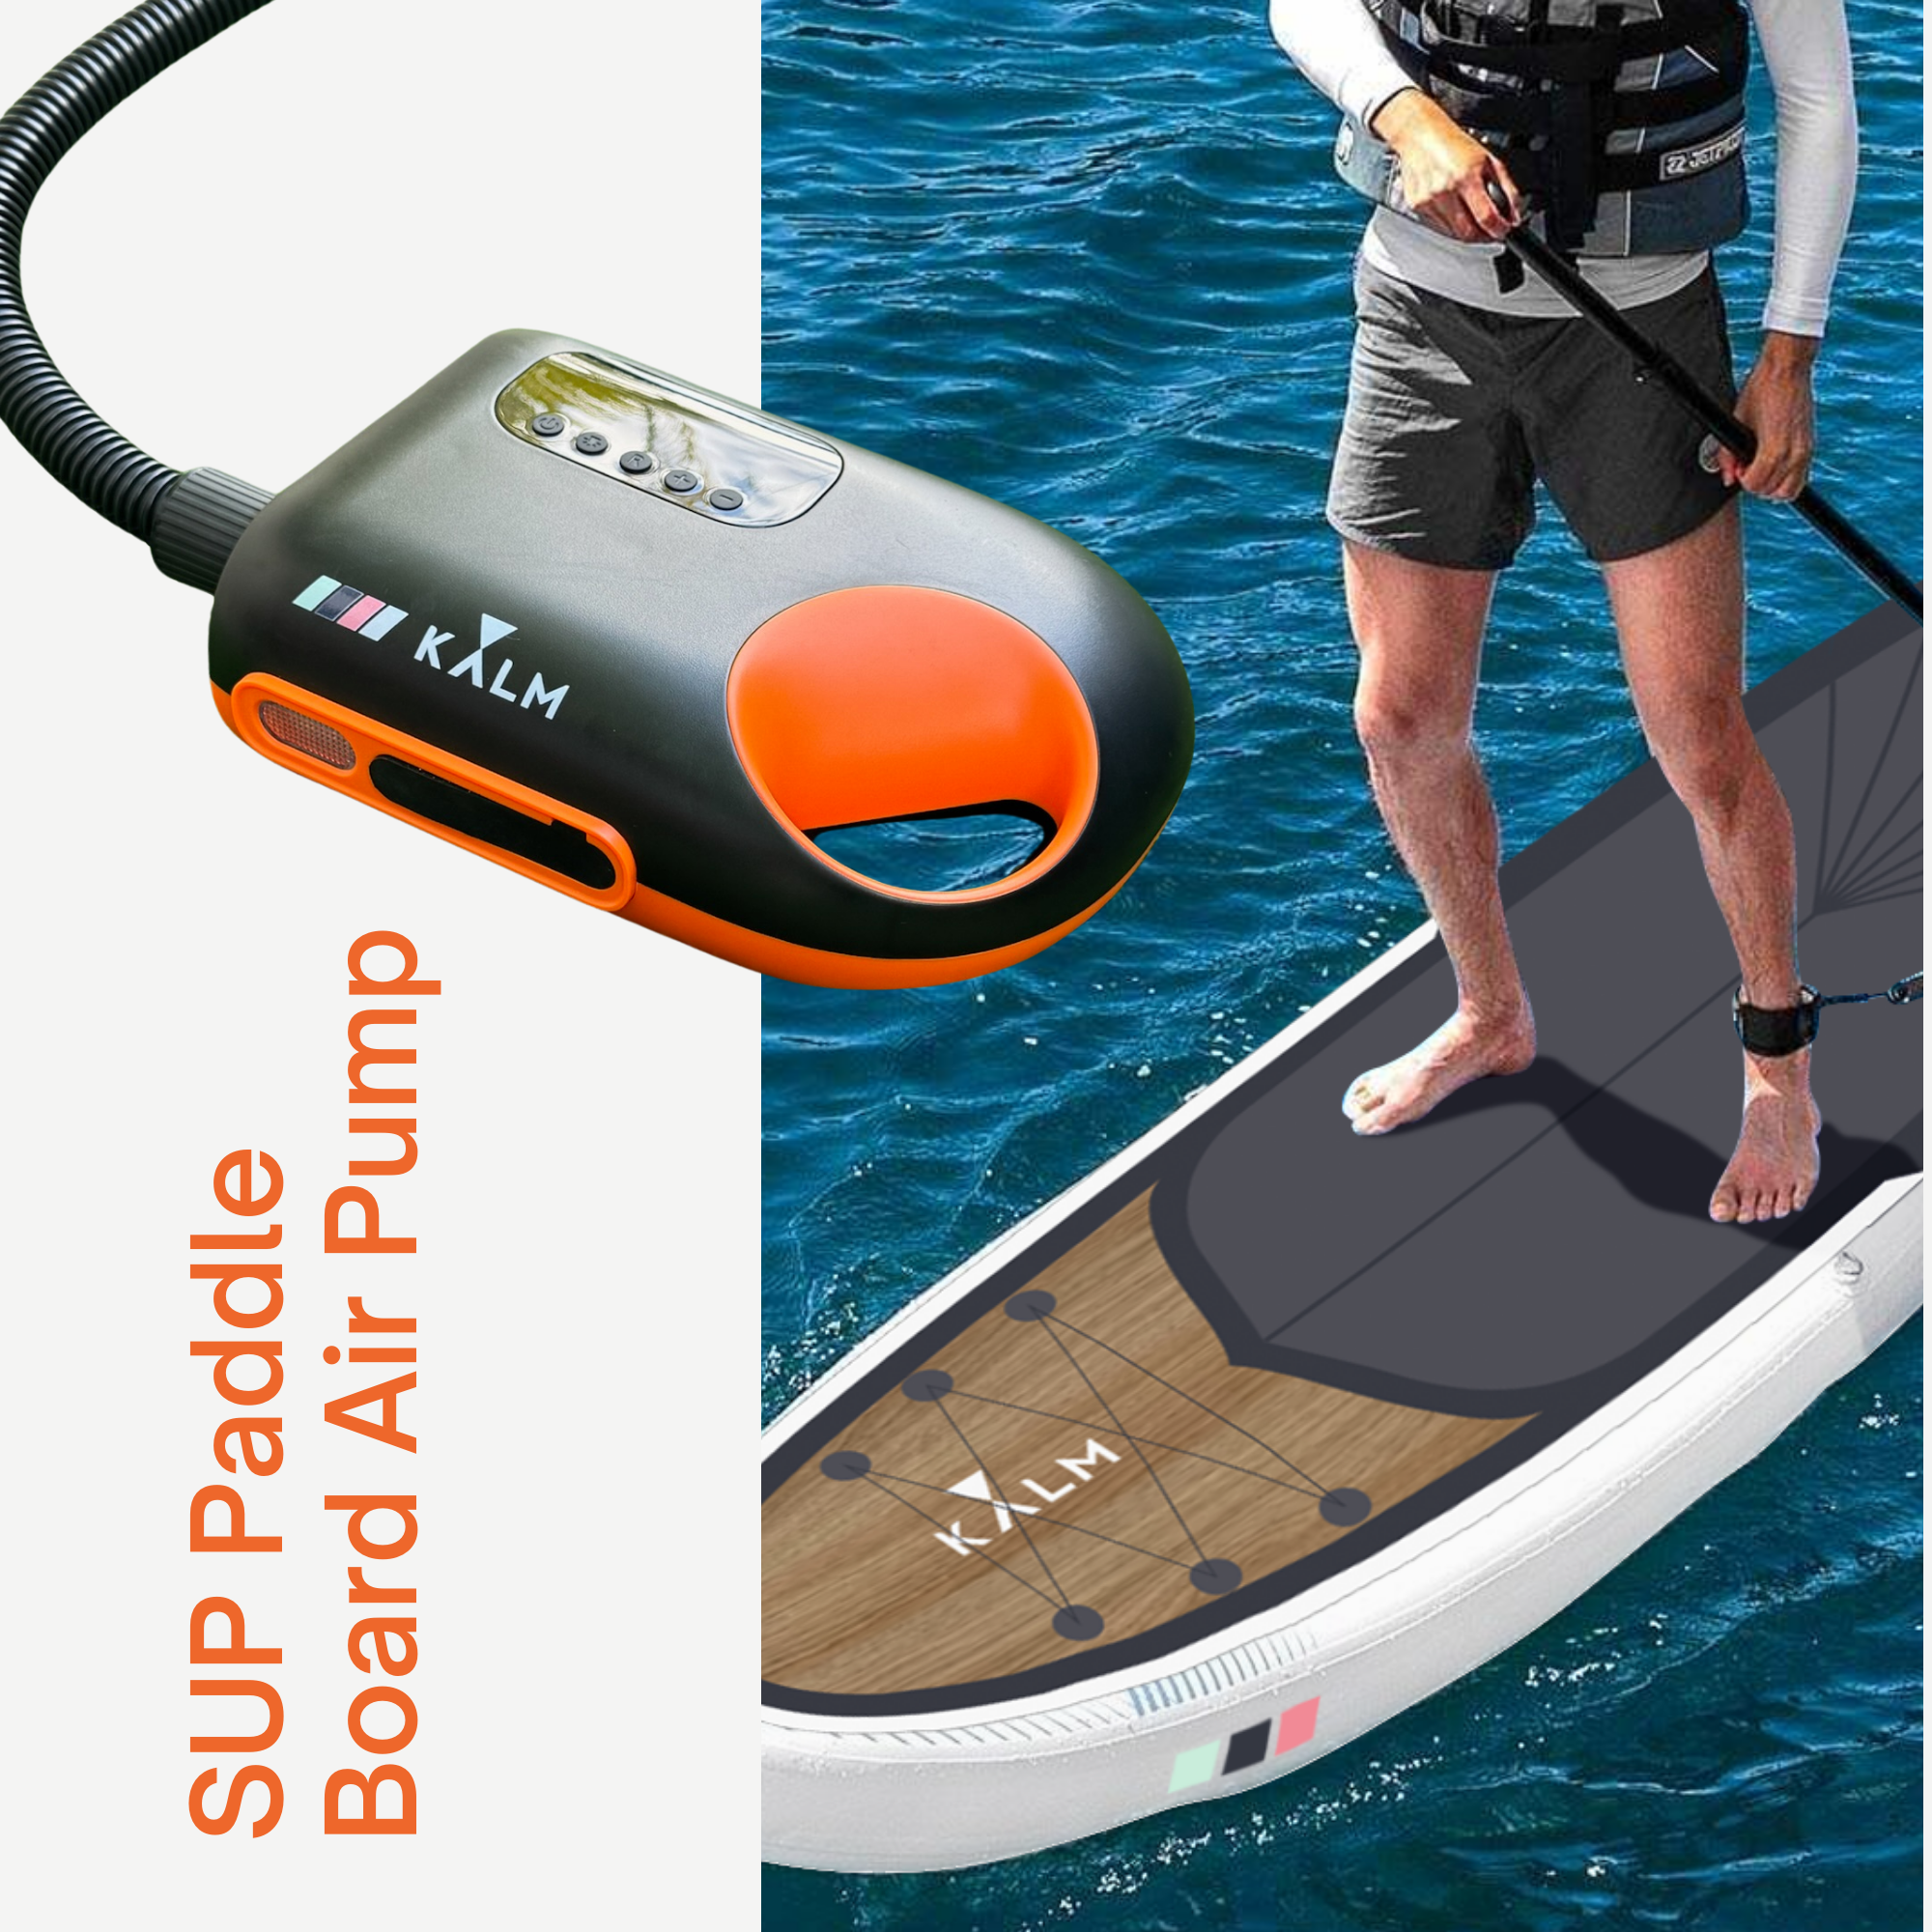 Kalm Rechargeable Electric Pump with Power Bank for SUP, Yoga Boards and Inflatable Cold Tub Plunges